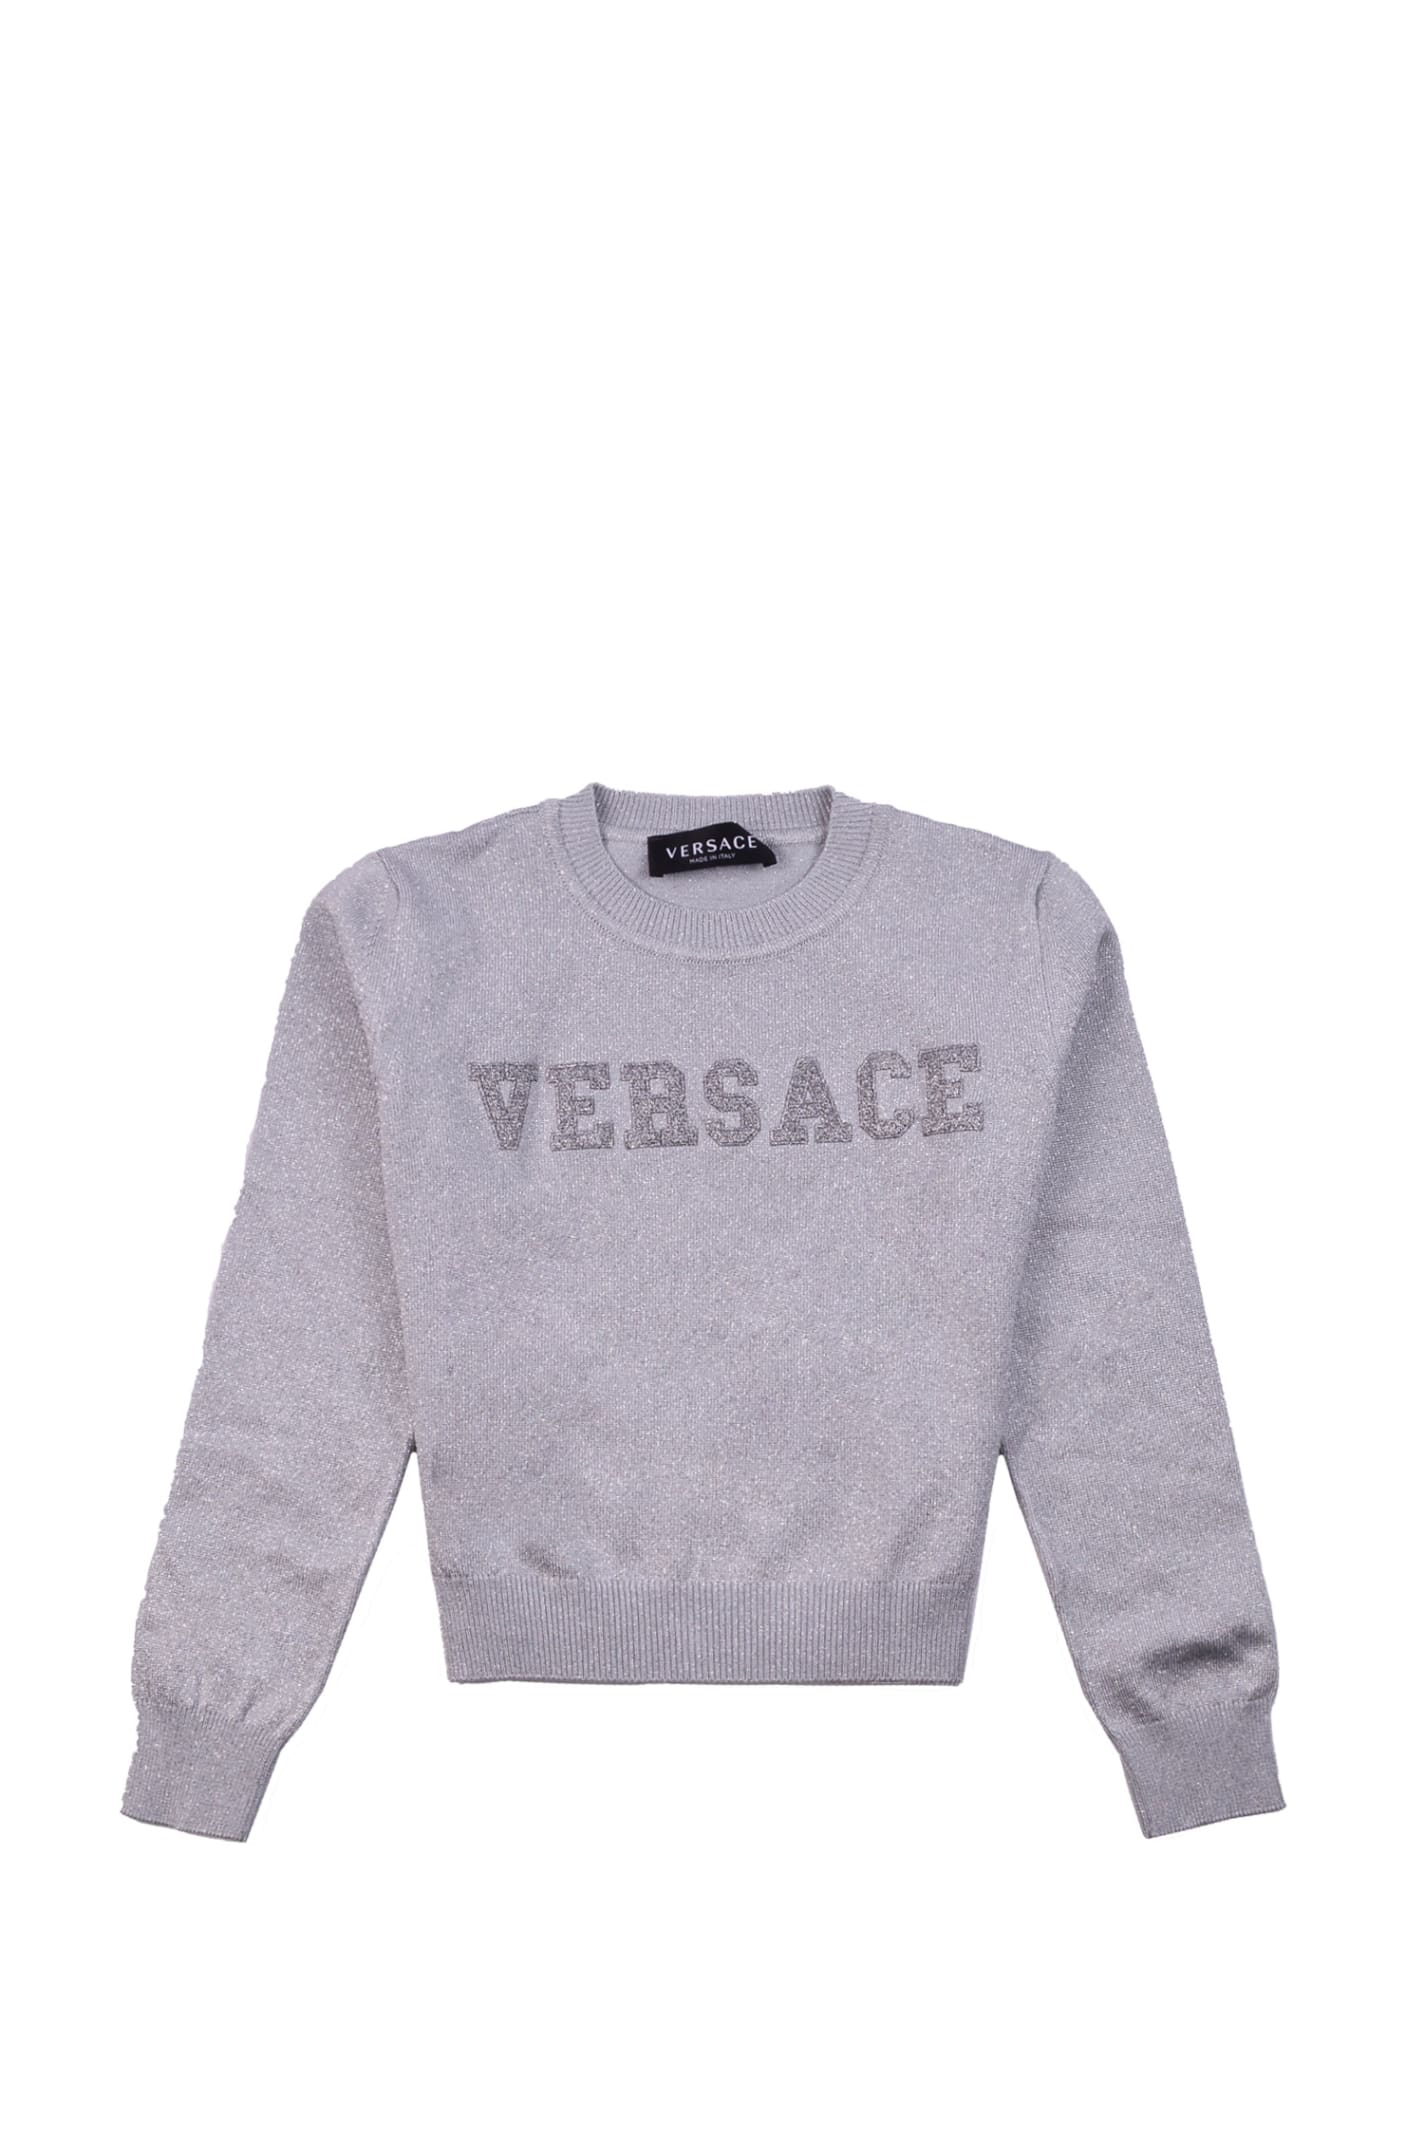 Versace Kids' Sweater With Glitter In Silver